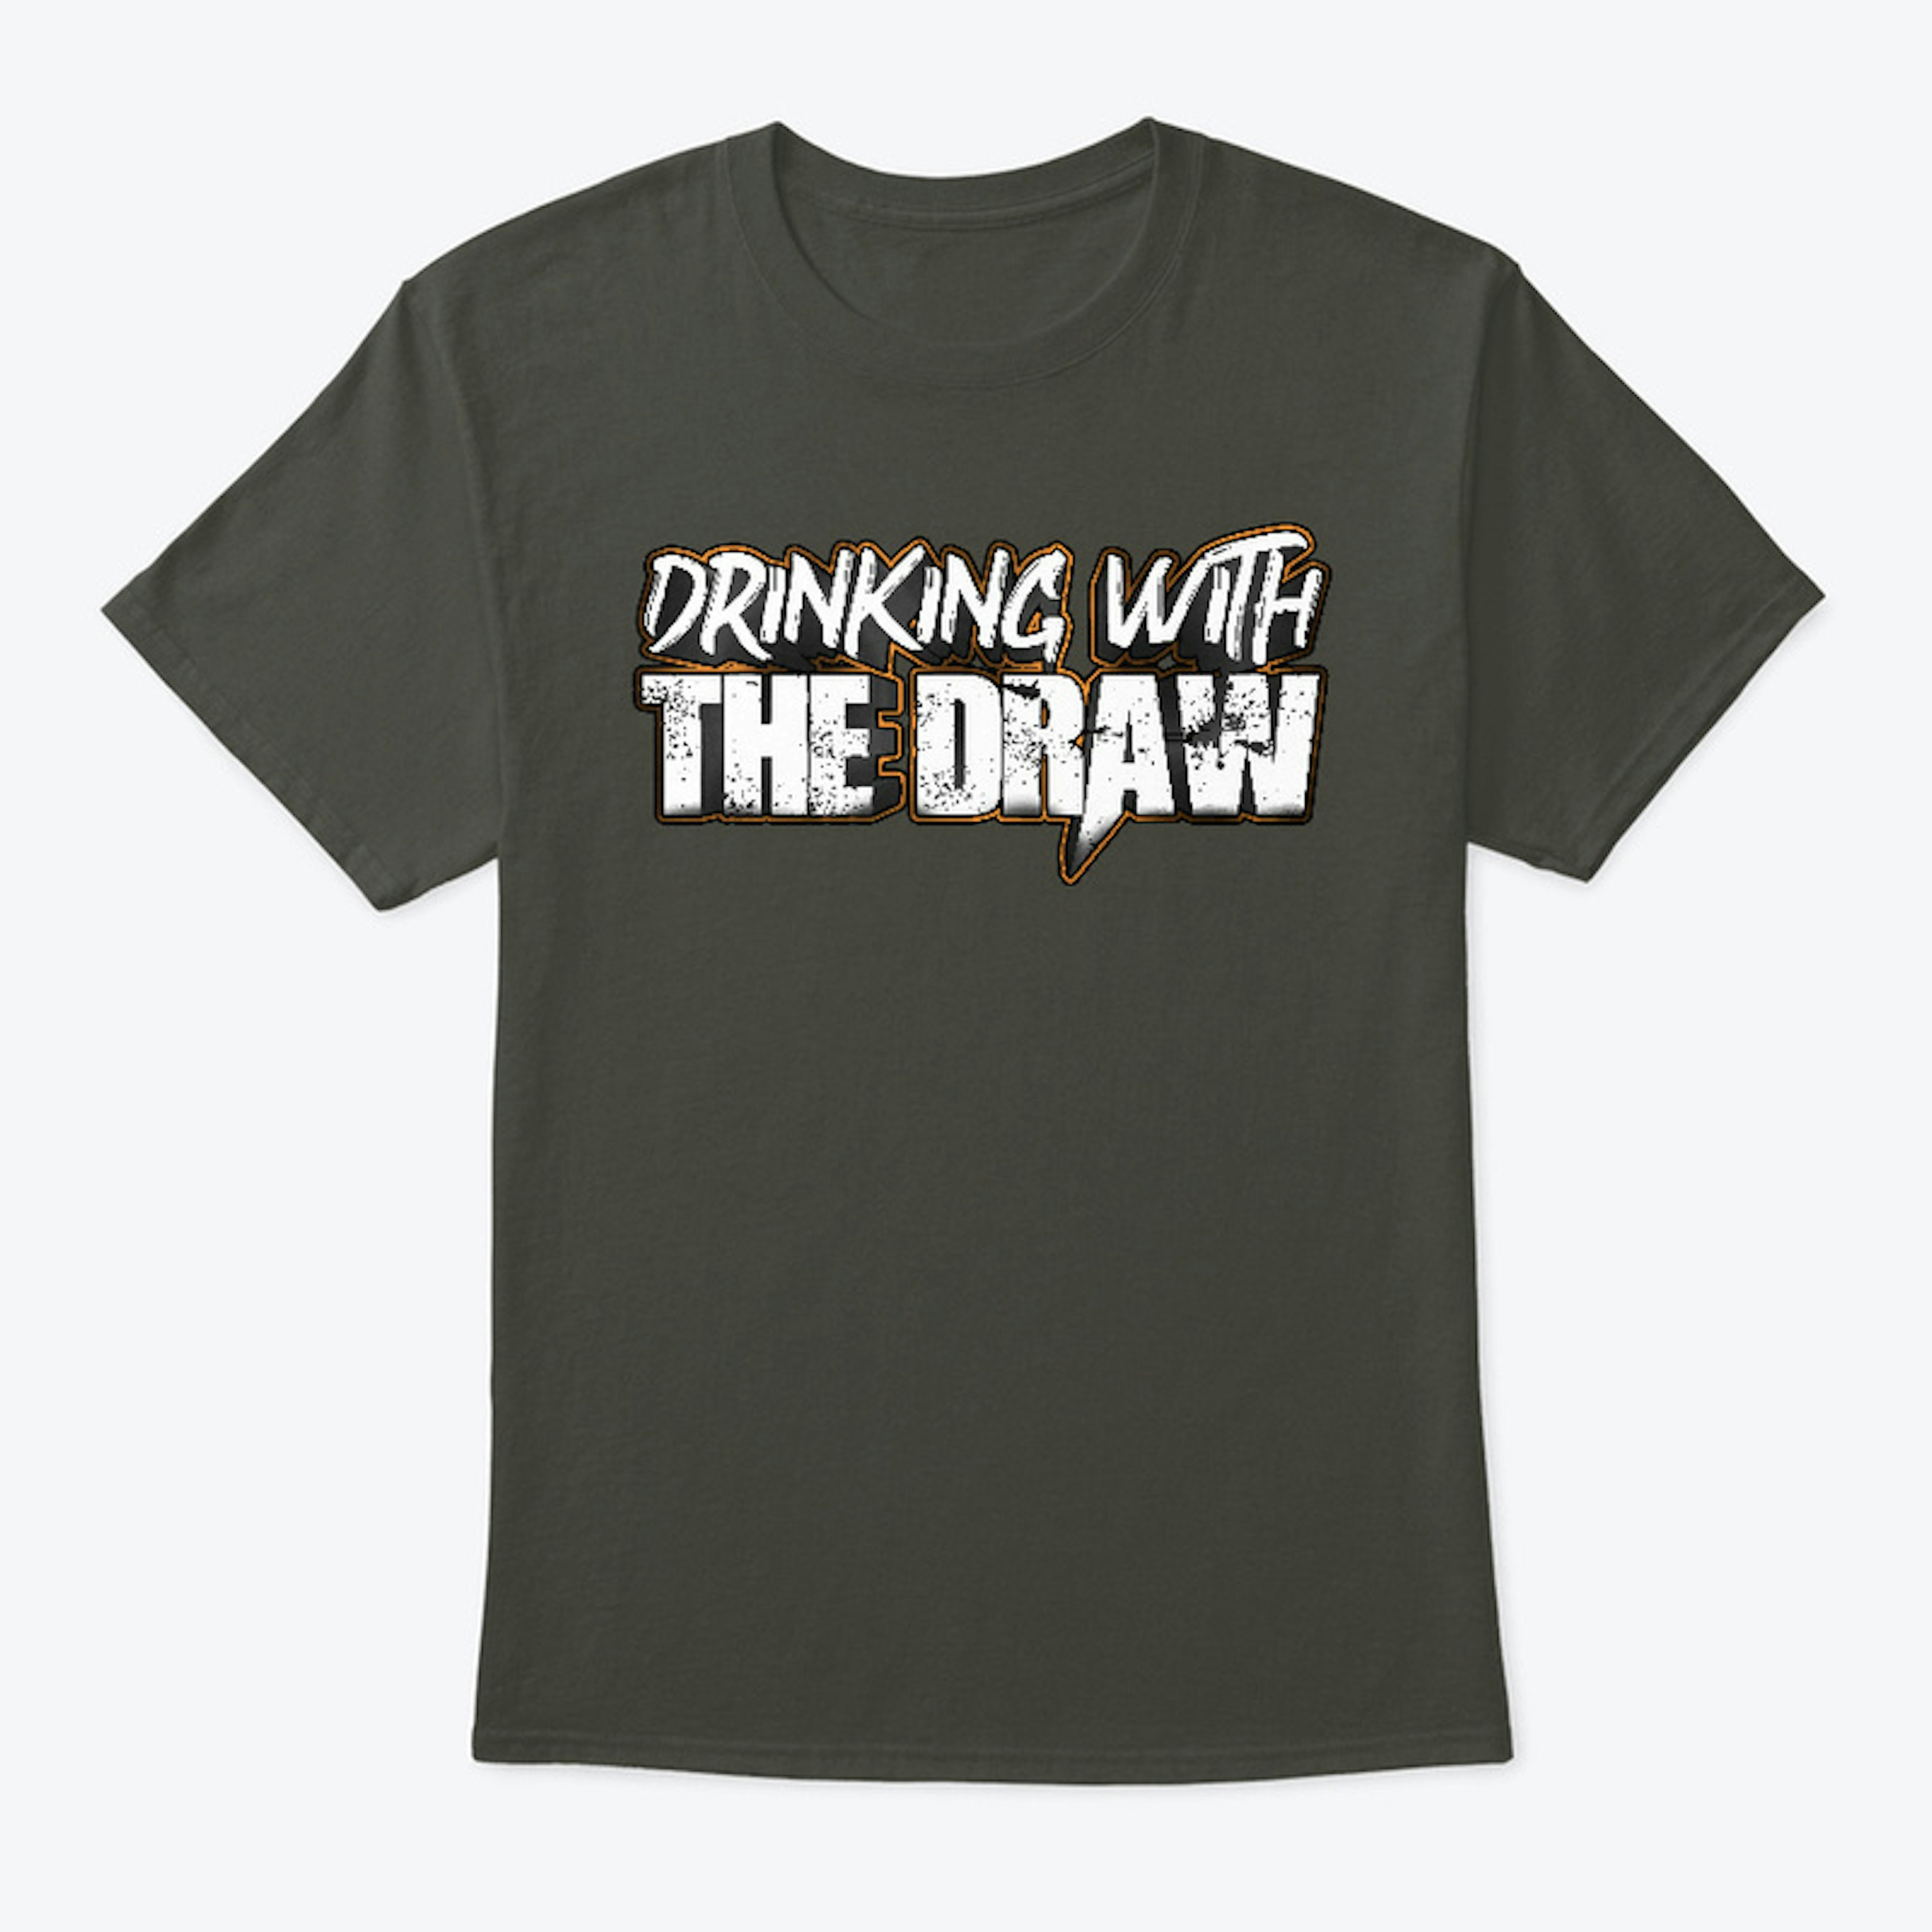 Drinking with THE DRAW - Shirt